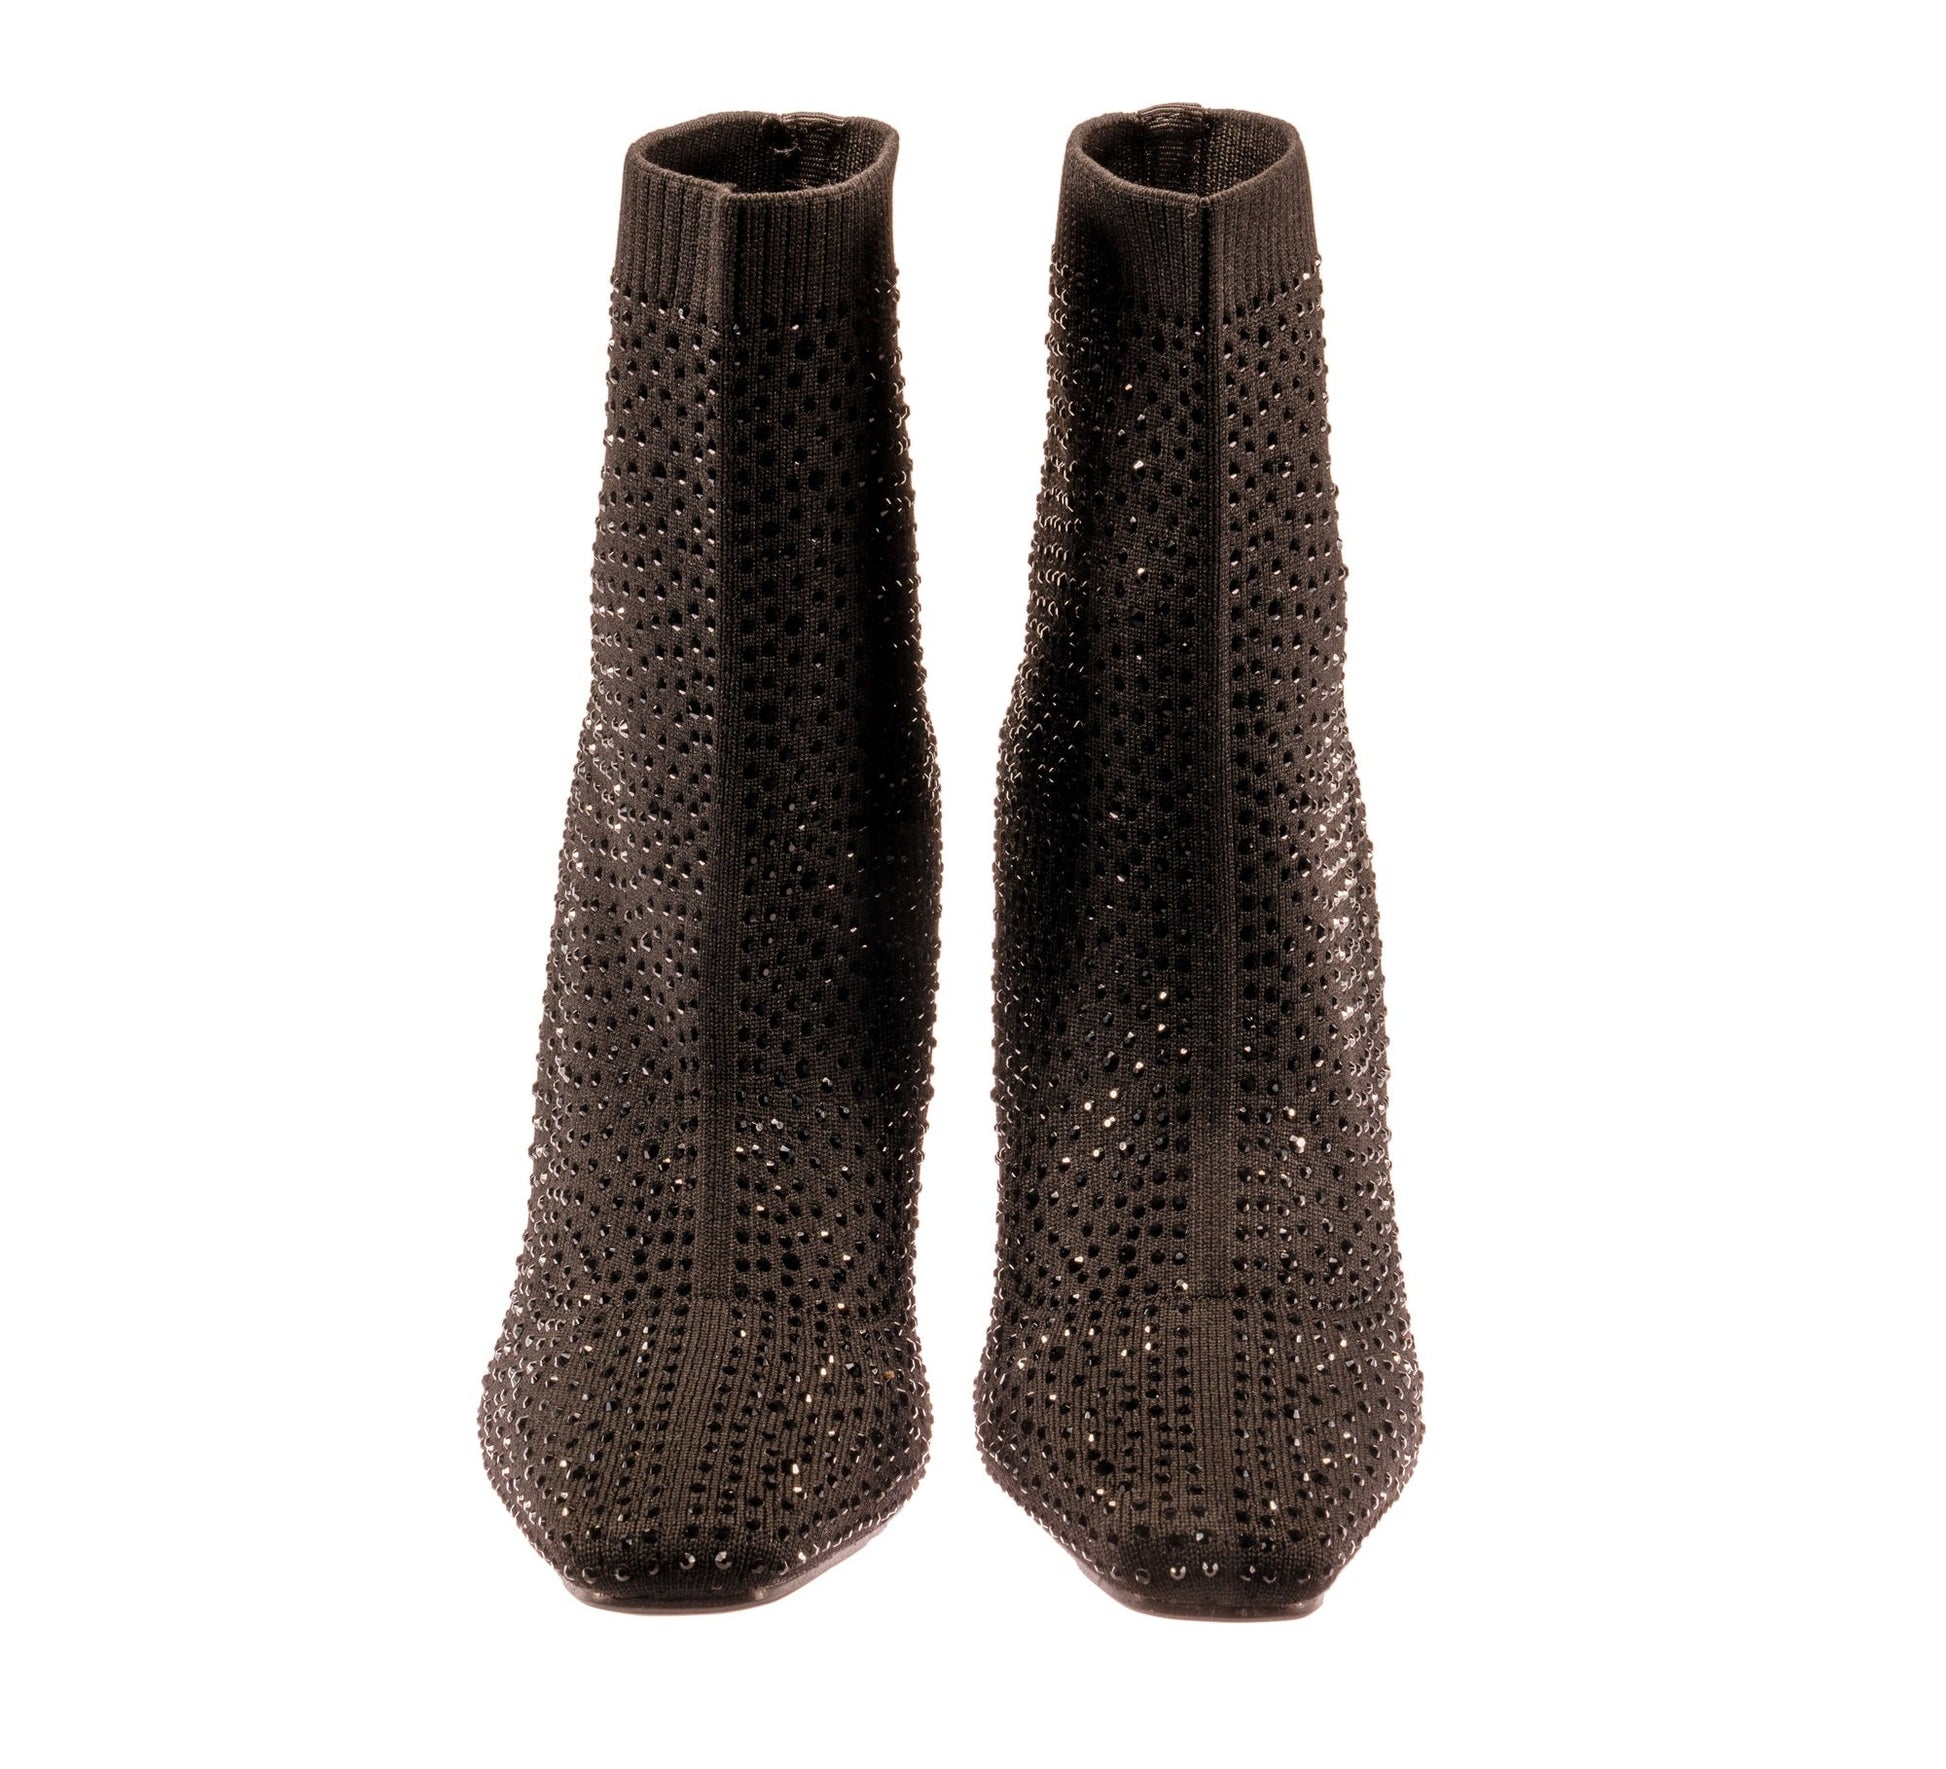 Ninety Union BARBIE Knitted Bootie With Stones On A Circular Hole Heel - ninetyunion